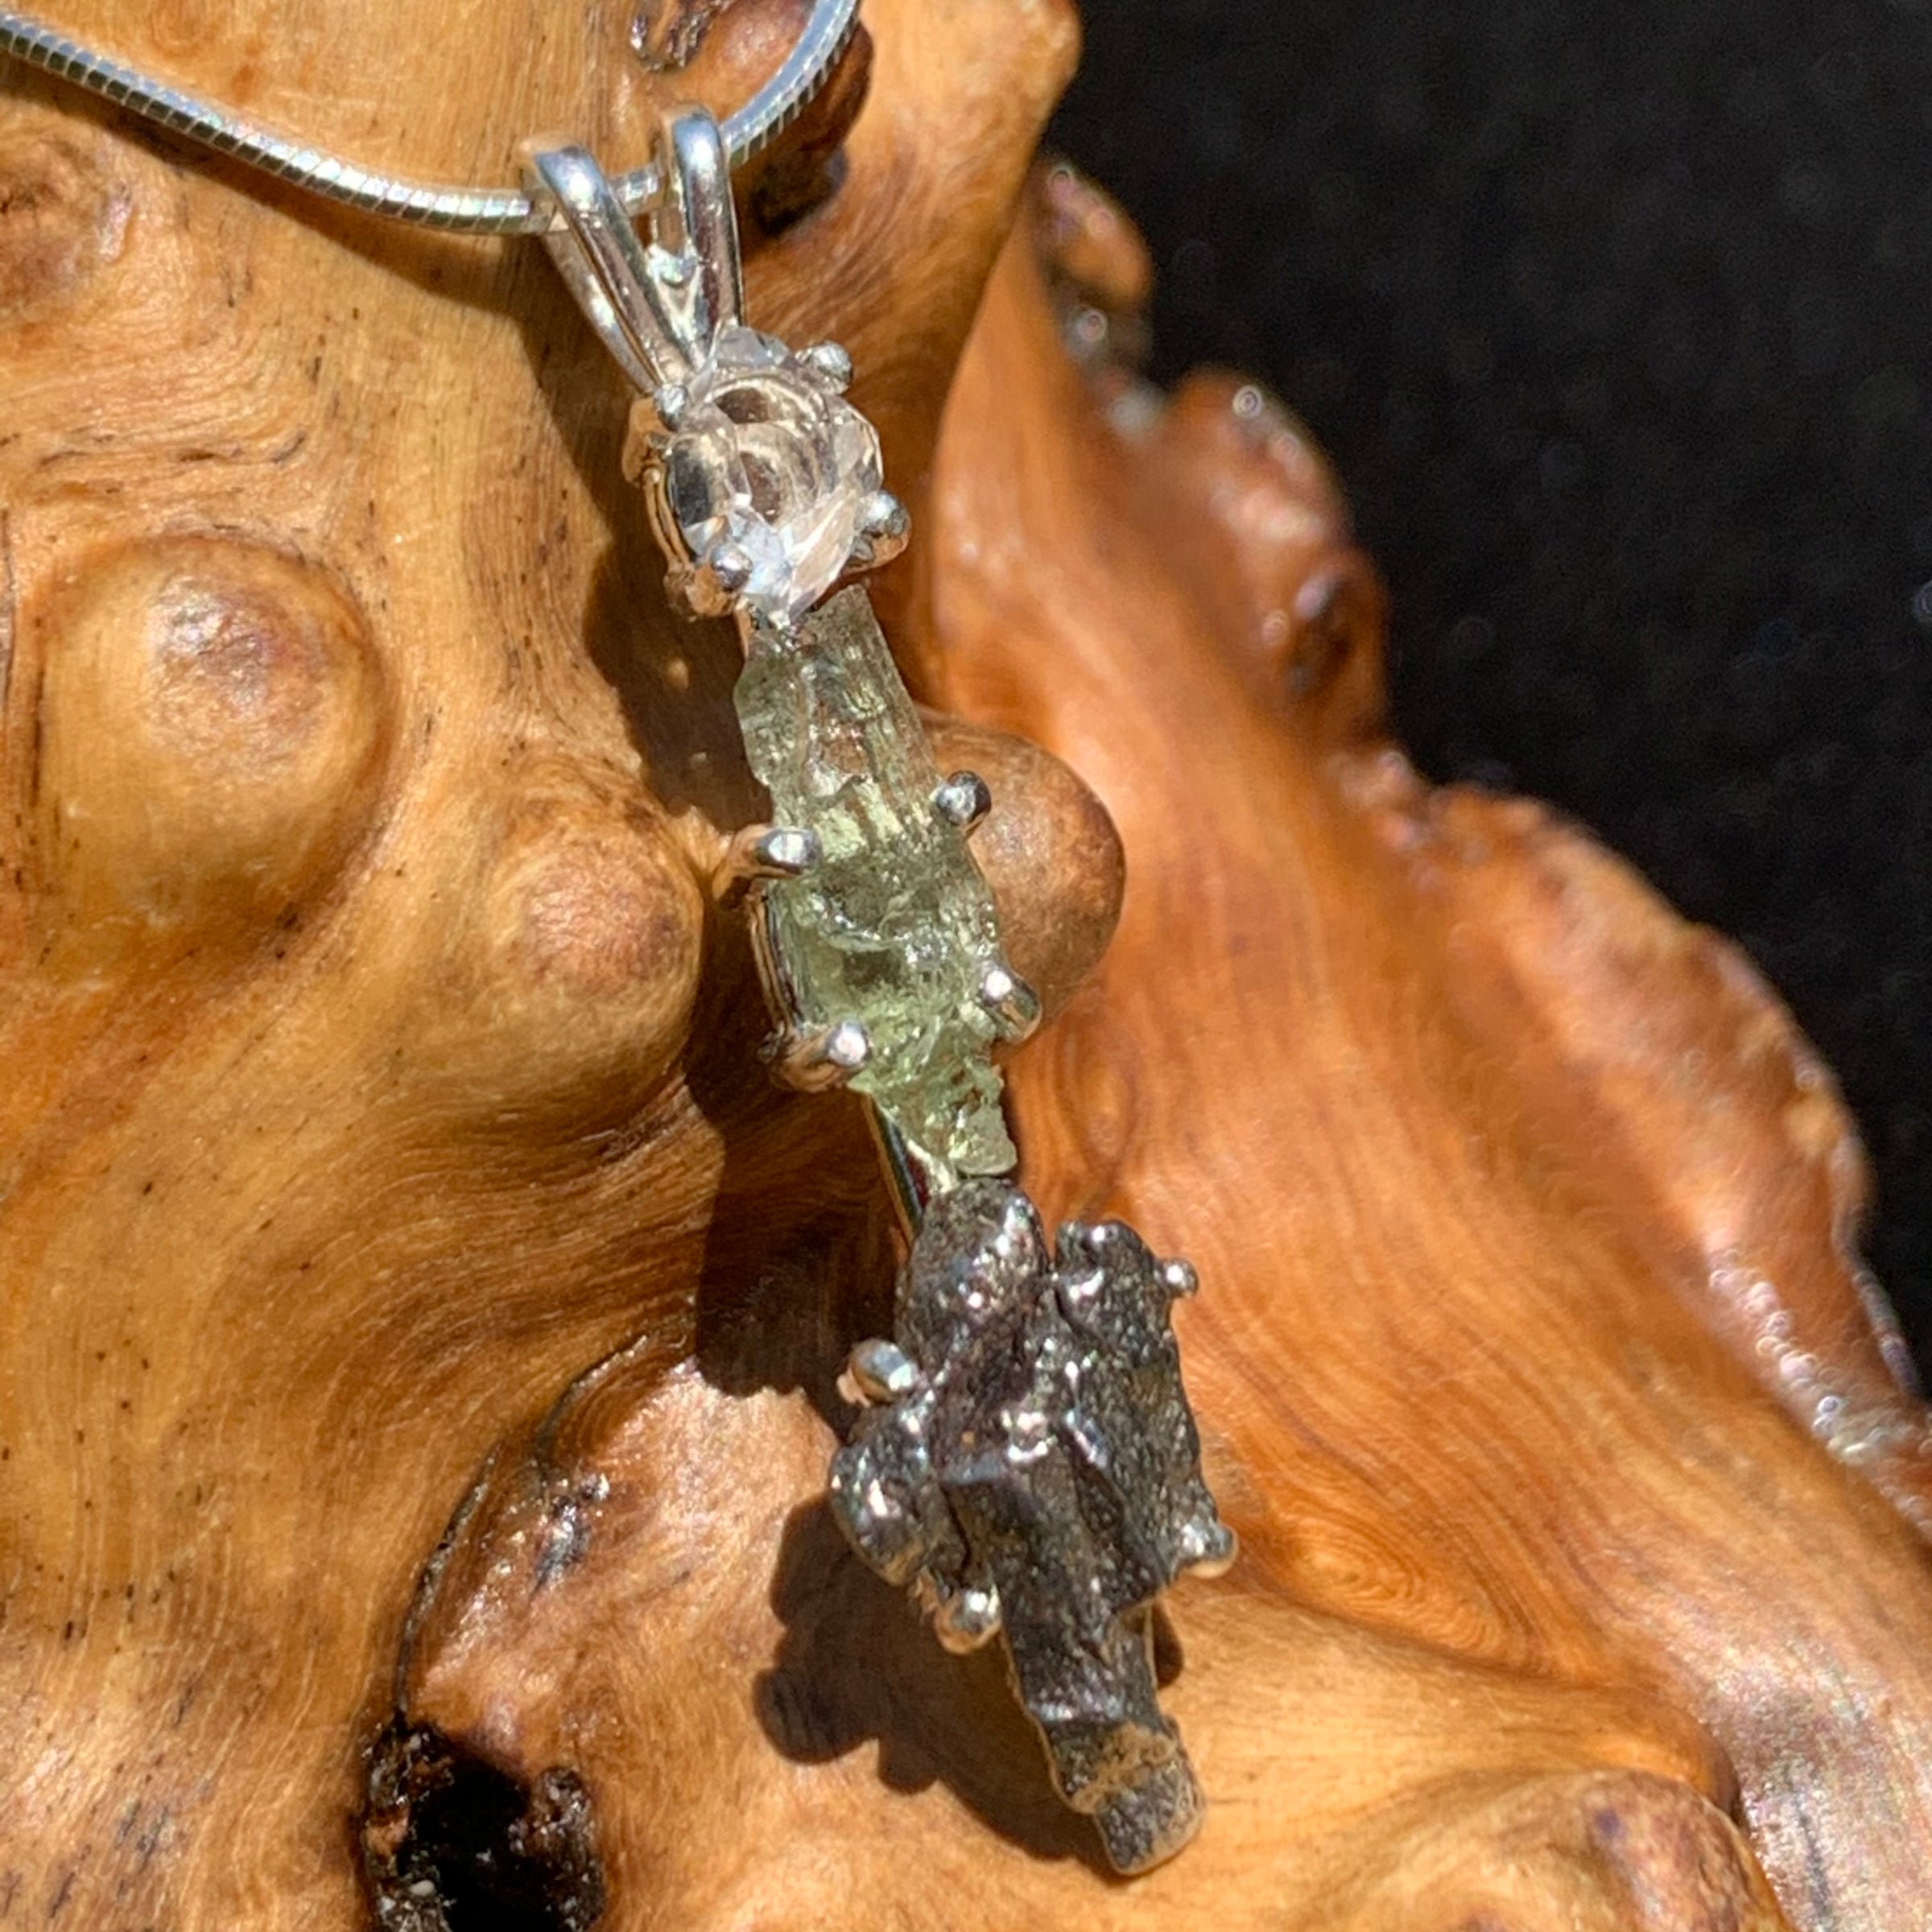 sterling silver pendant necklace with Herkimer diamond, moldavite, and campo del cielo meteorite sitting on driftwood for display